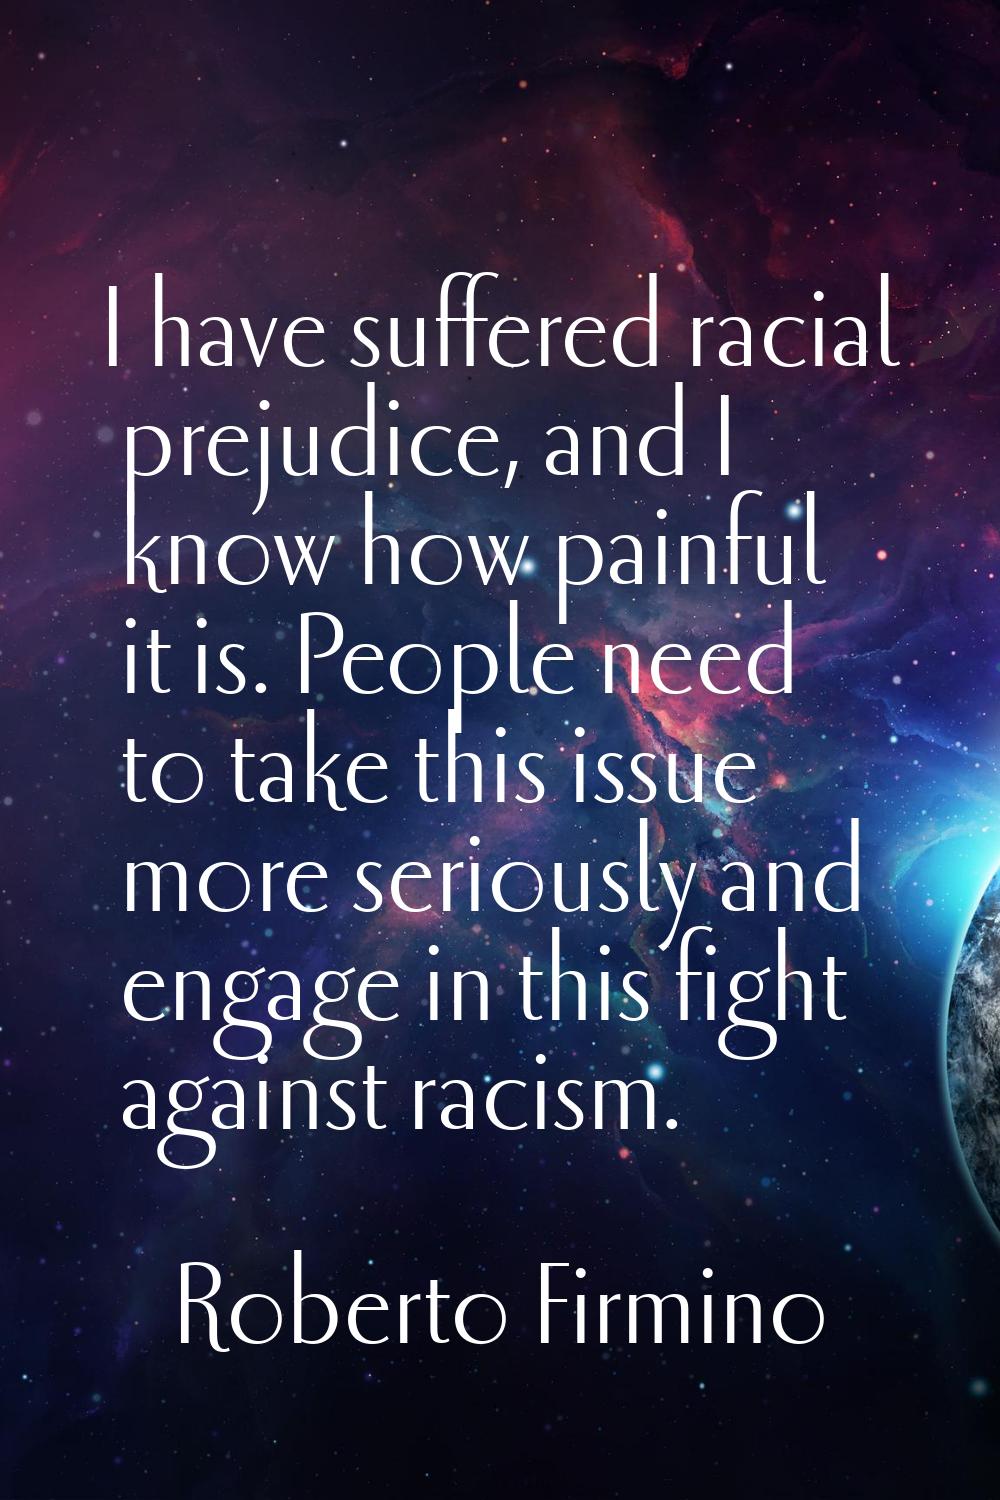 I have suffered racial prejudice, and I know how painful it is. People need to take this issue more